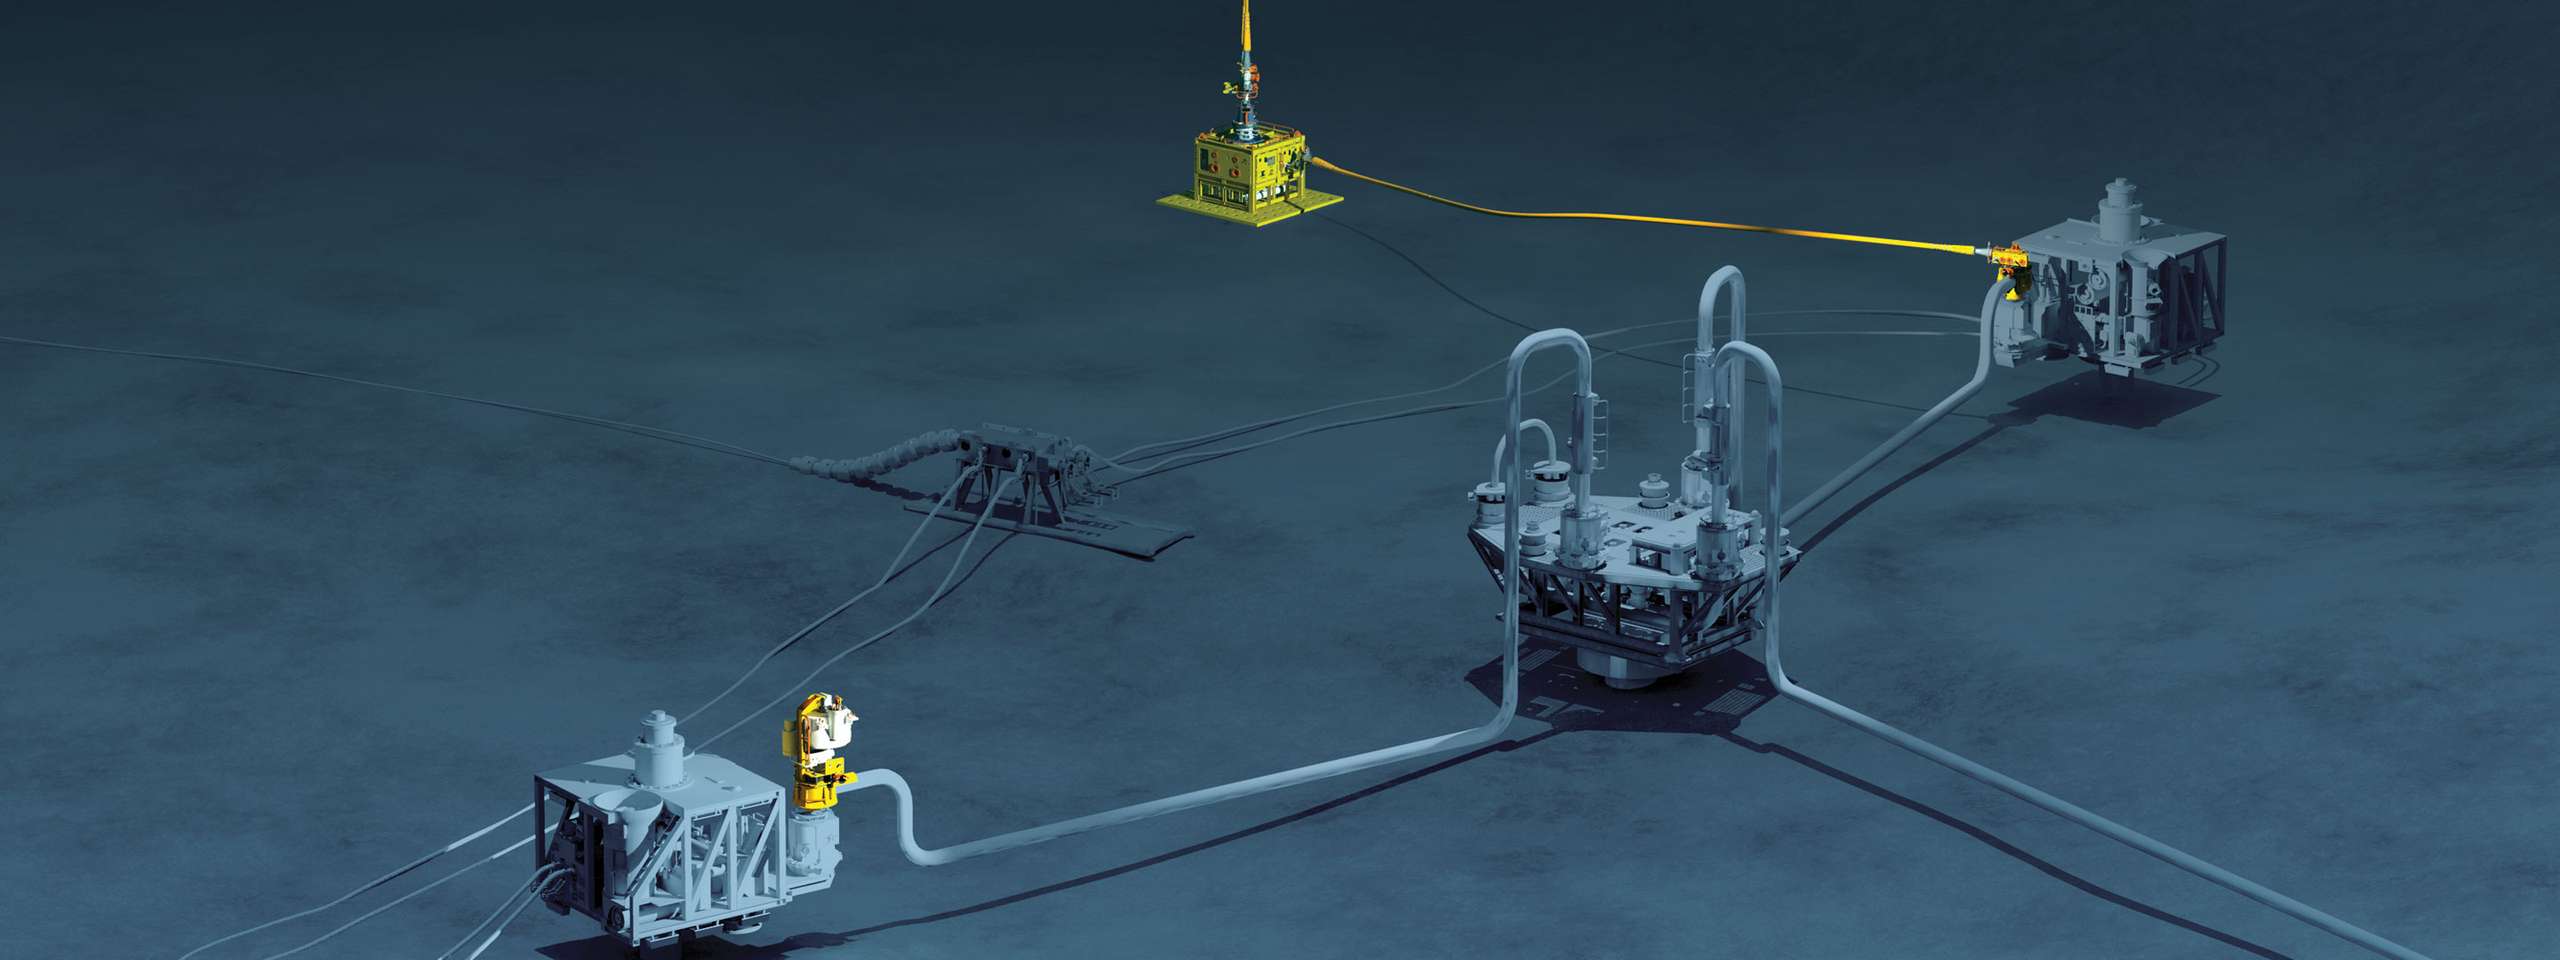 3D render of subsea project in West Africa